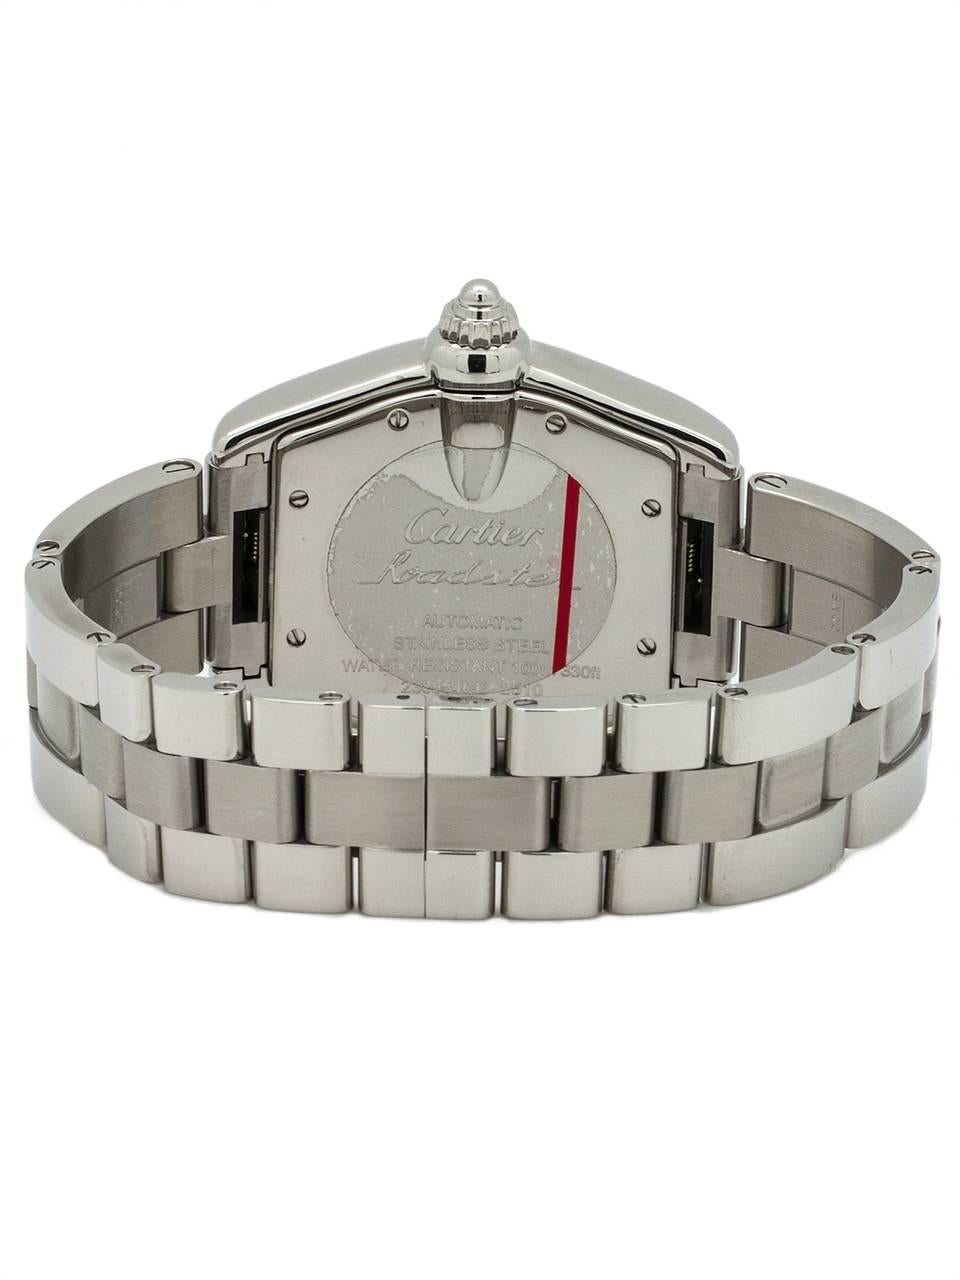 
Cartier Man’s Roadster  automatic ref# 2510 circa 2000s. 38 x 44.5mm tonneau shaped Stainless Steel case with steel cabochon style screw down crown, matte silvered textured dial with black stretch Roman numerals, and black outline kite shaped